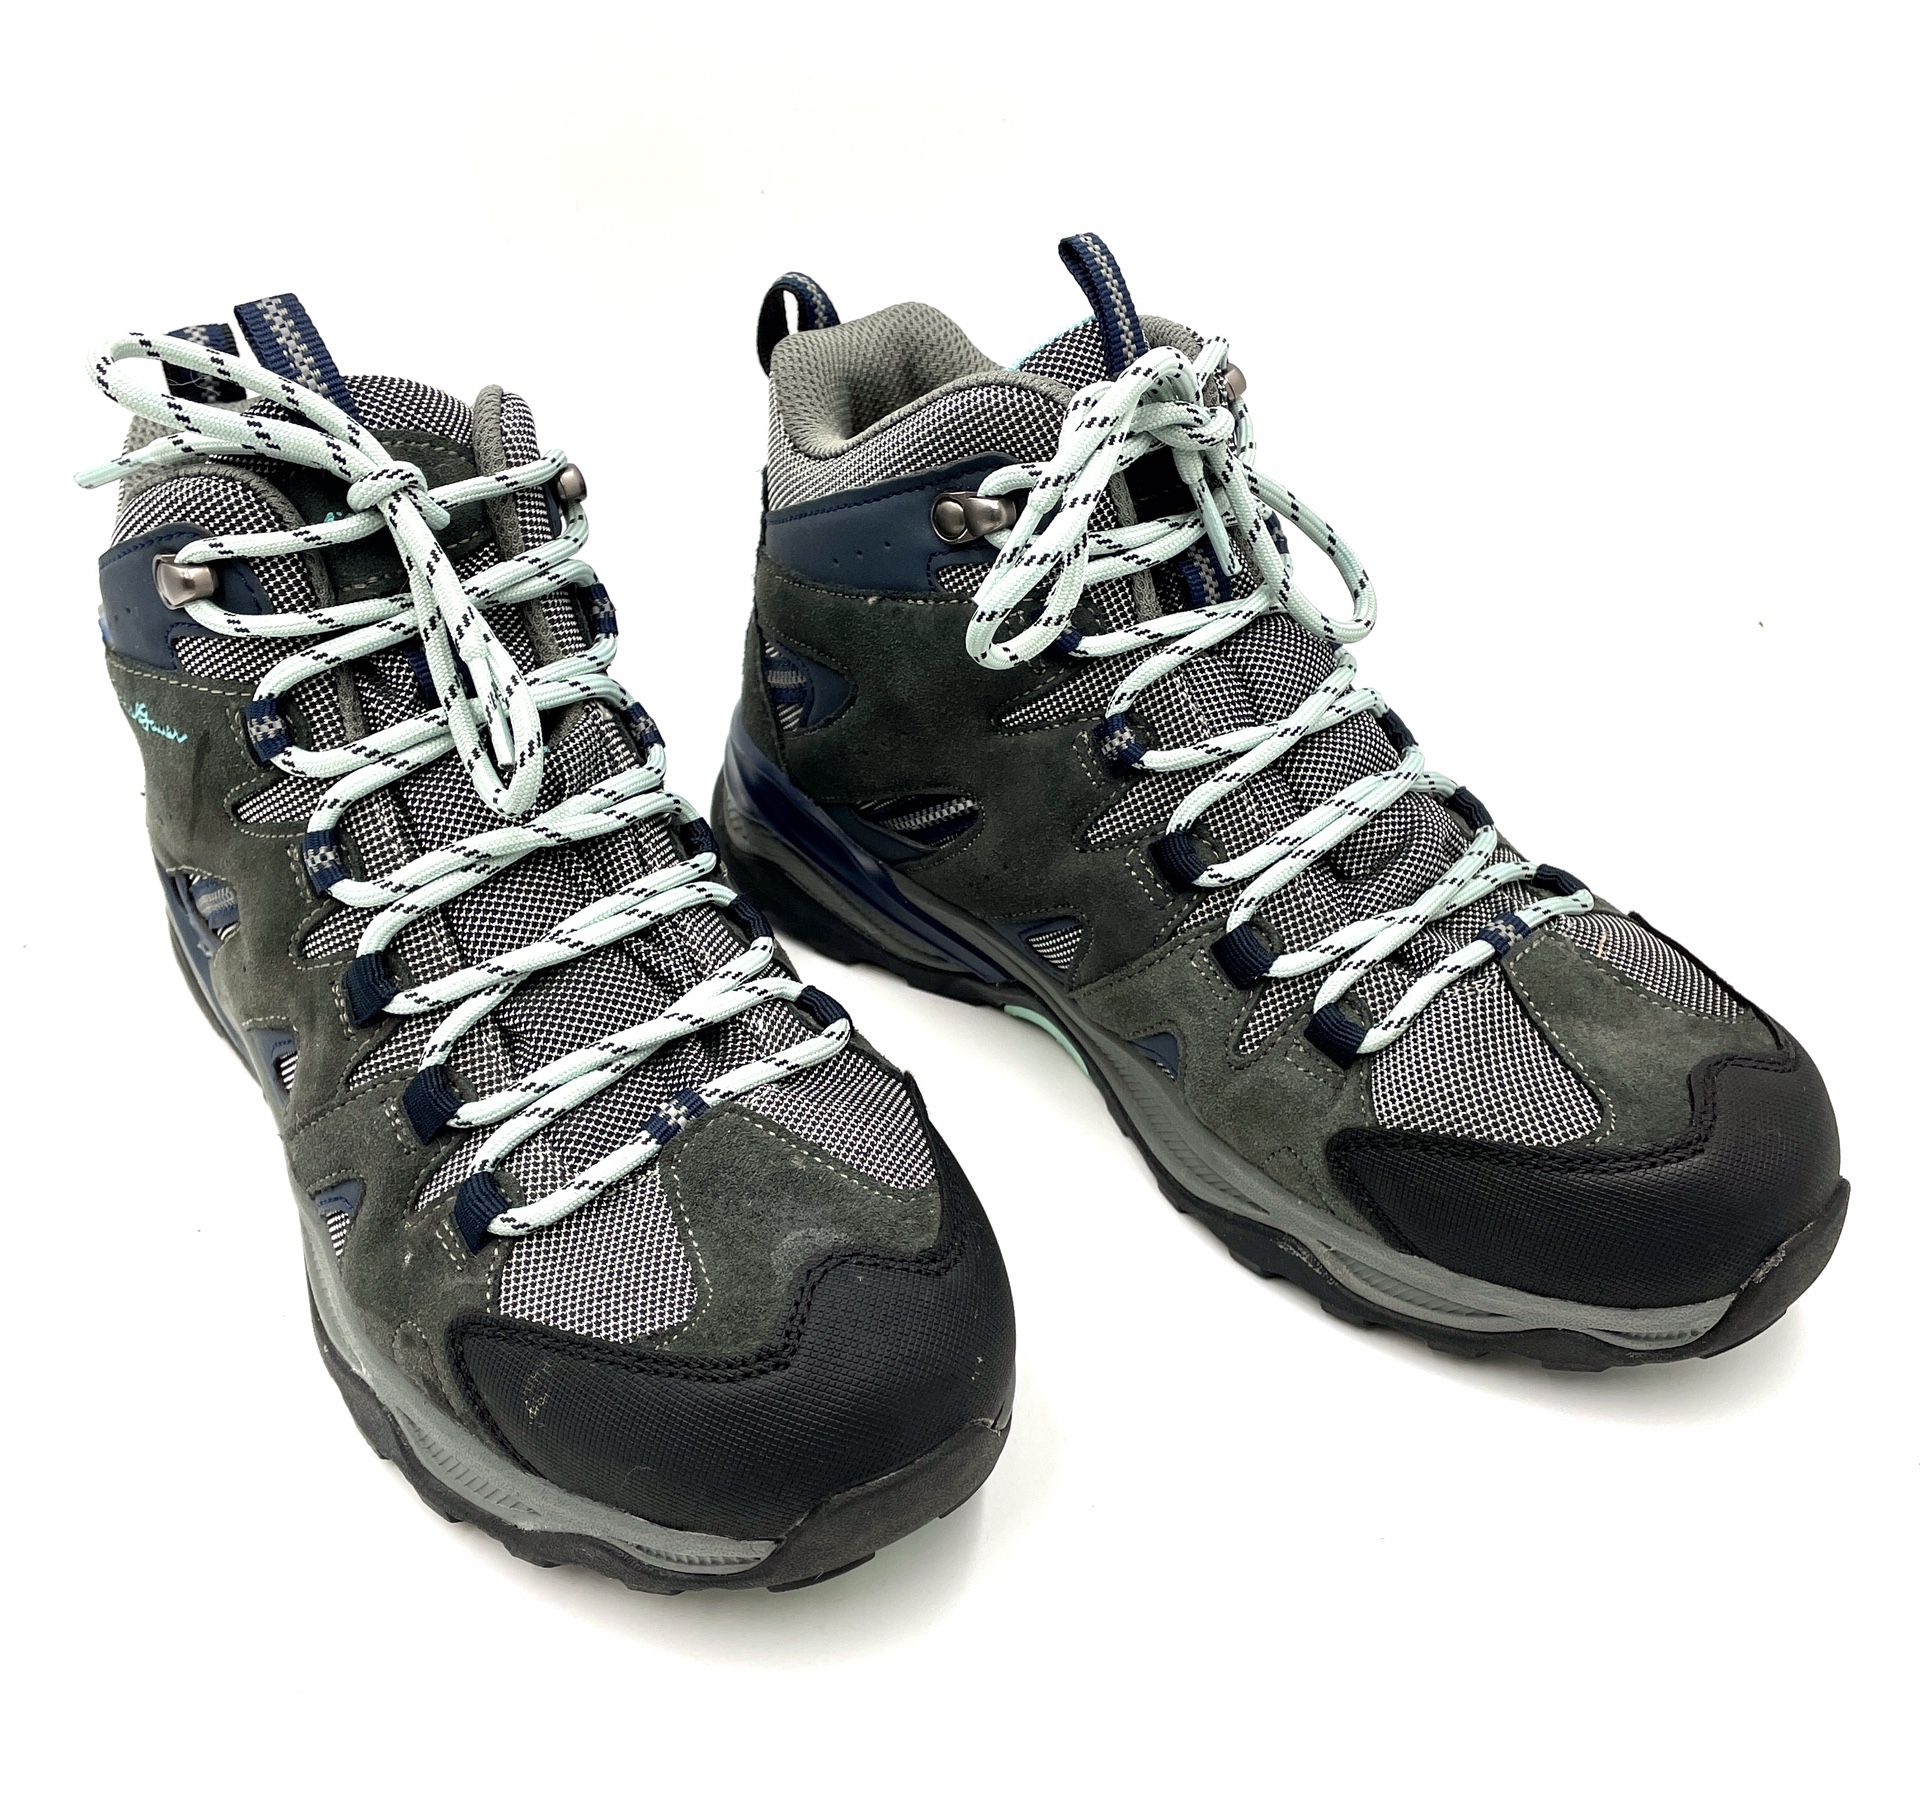 Eddie Bauer Women's Lake Union Gray Teal Waterproof Ankle Hiking Boot Size 8.5 M